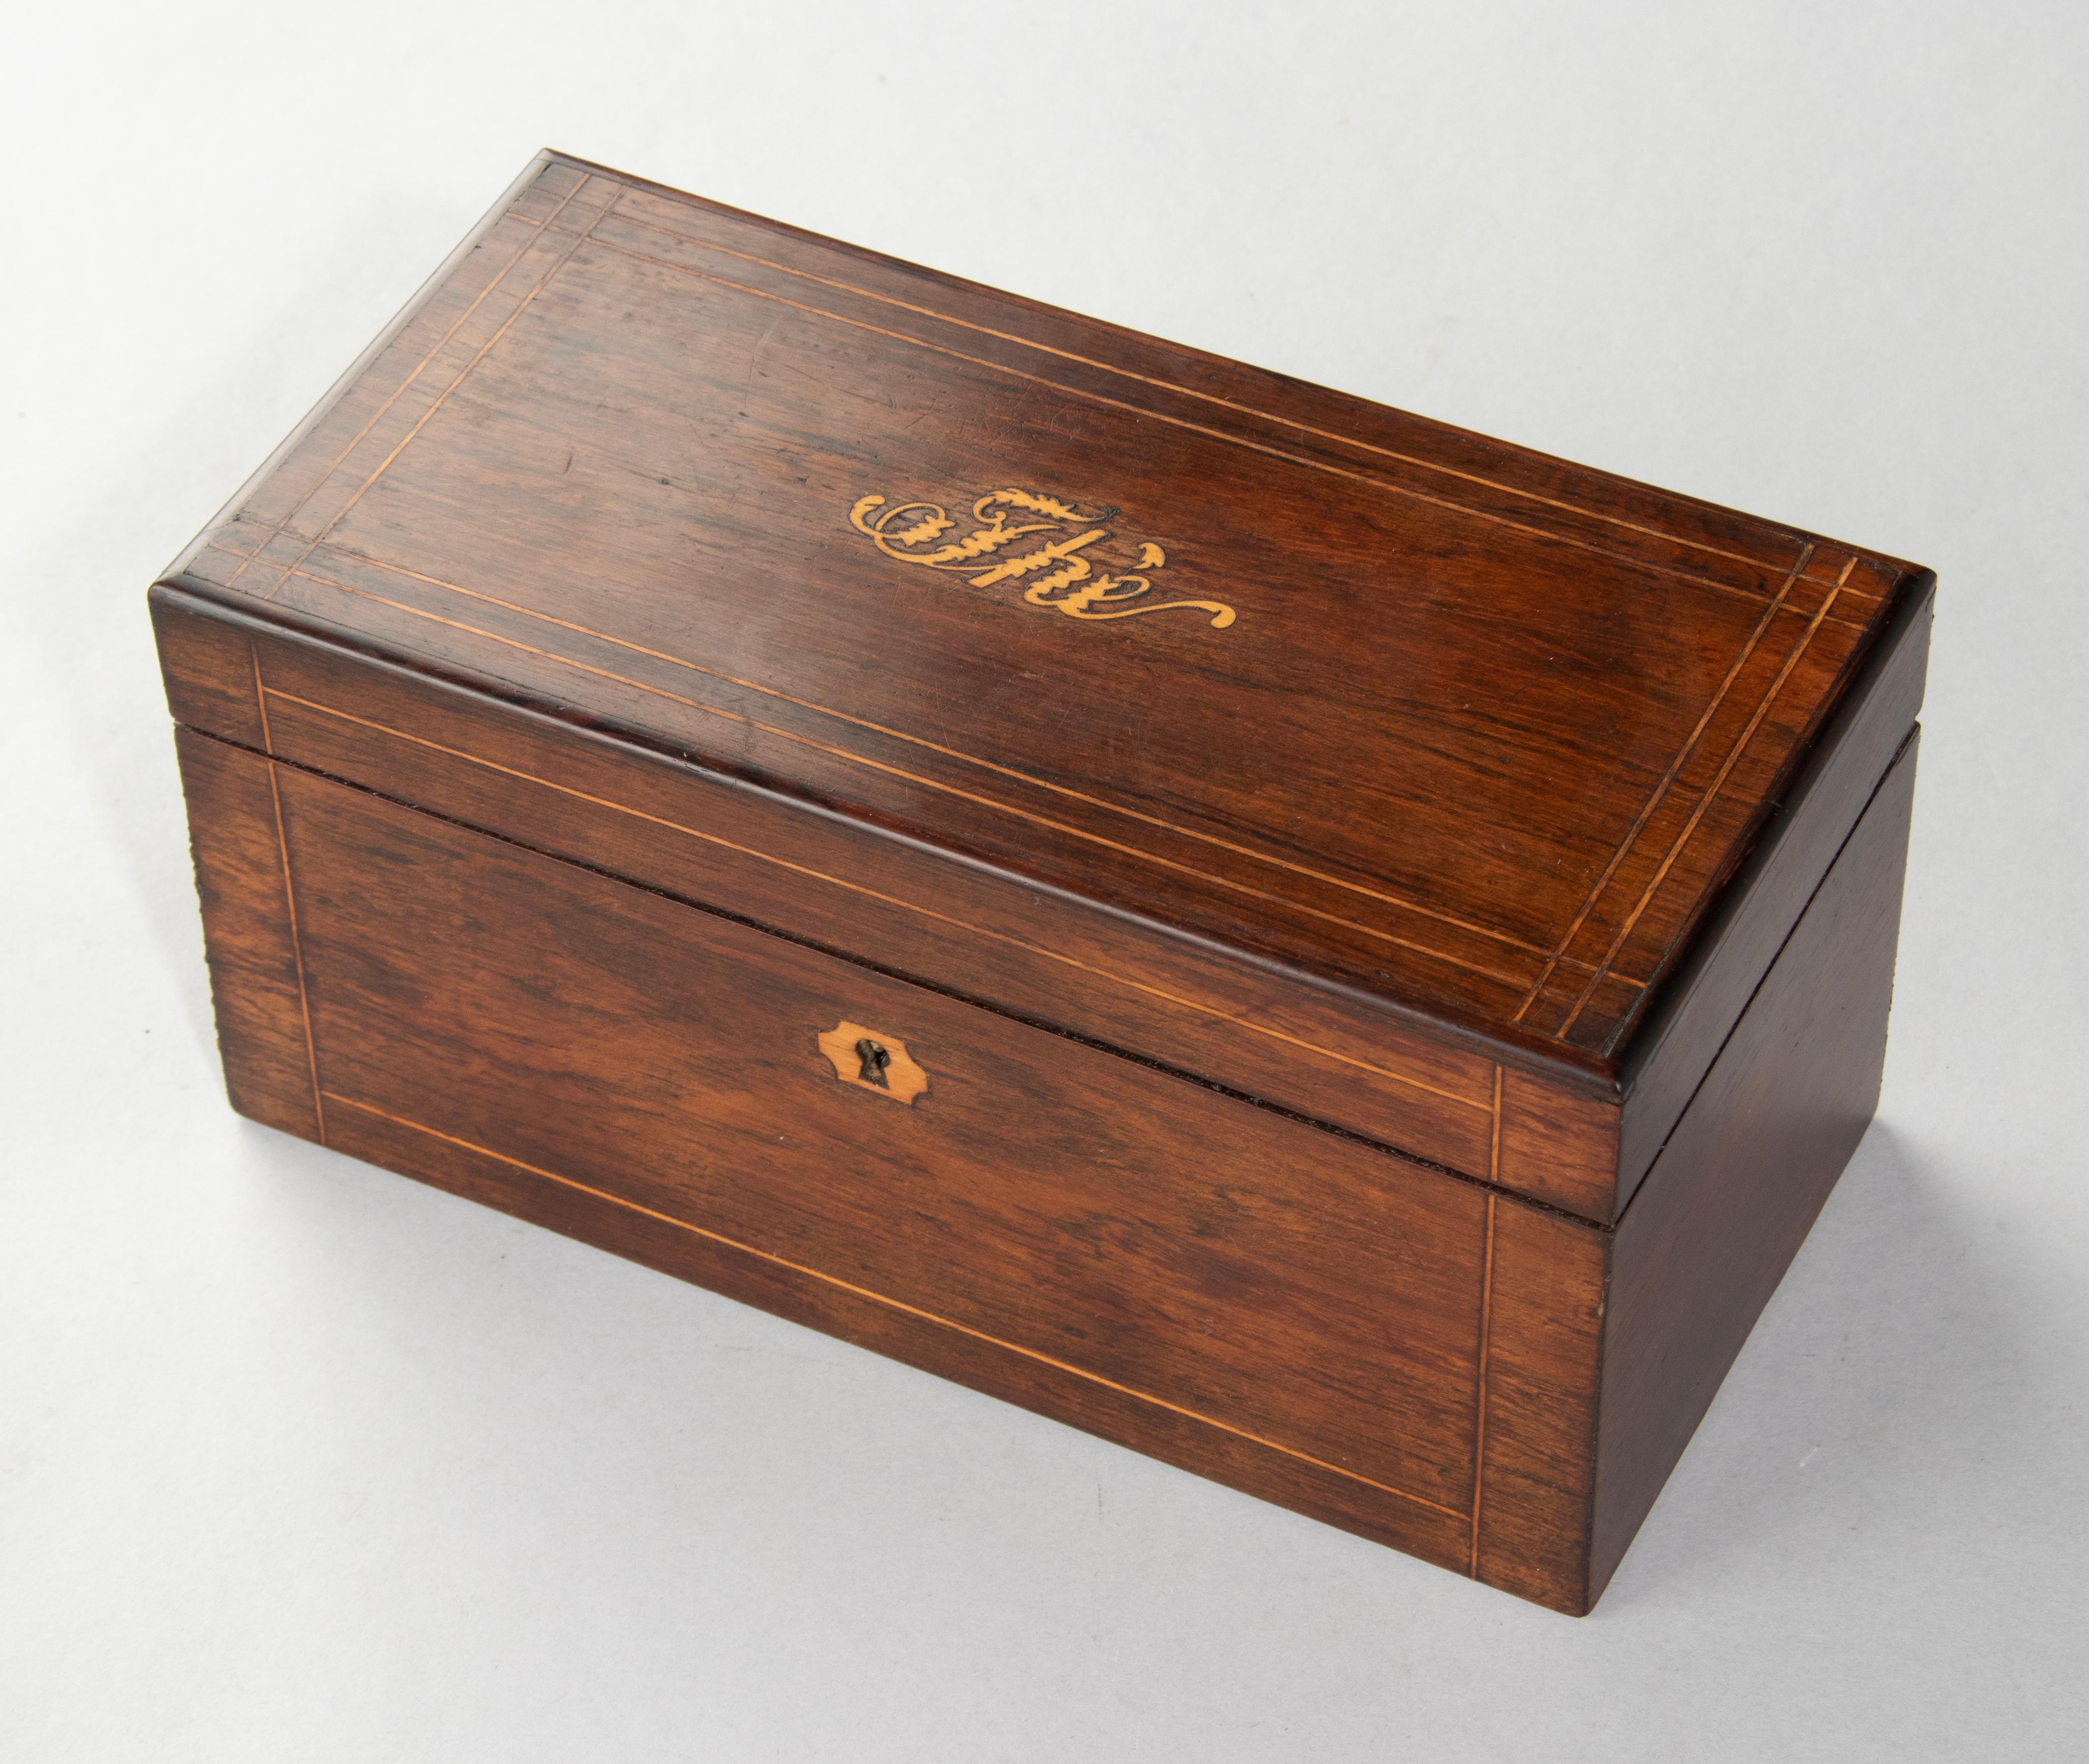 Late 19th Century French Wood Veneer Marquetry Tea Caddy For Sale 3